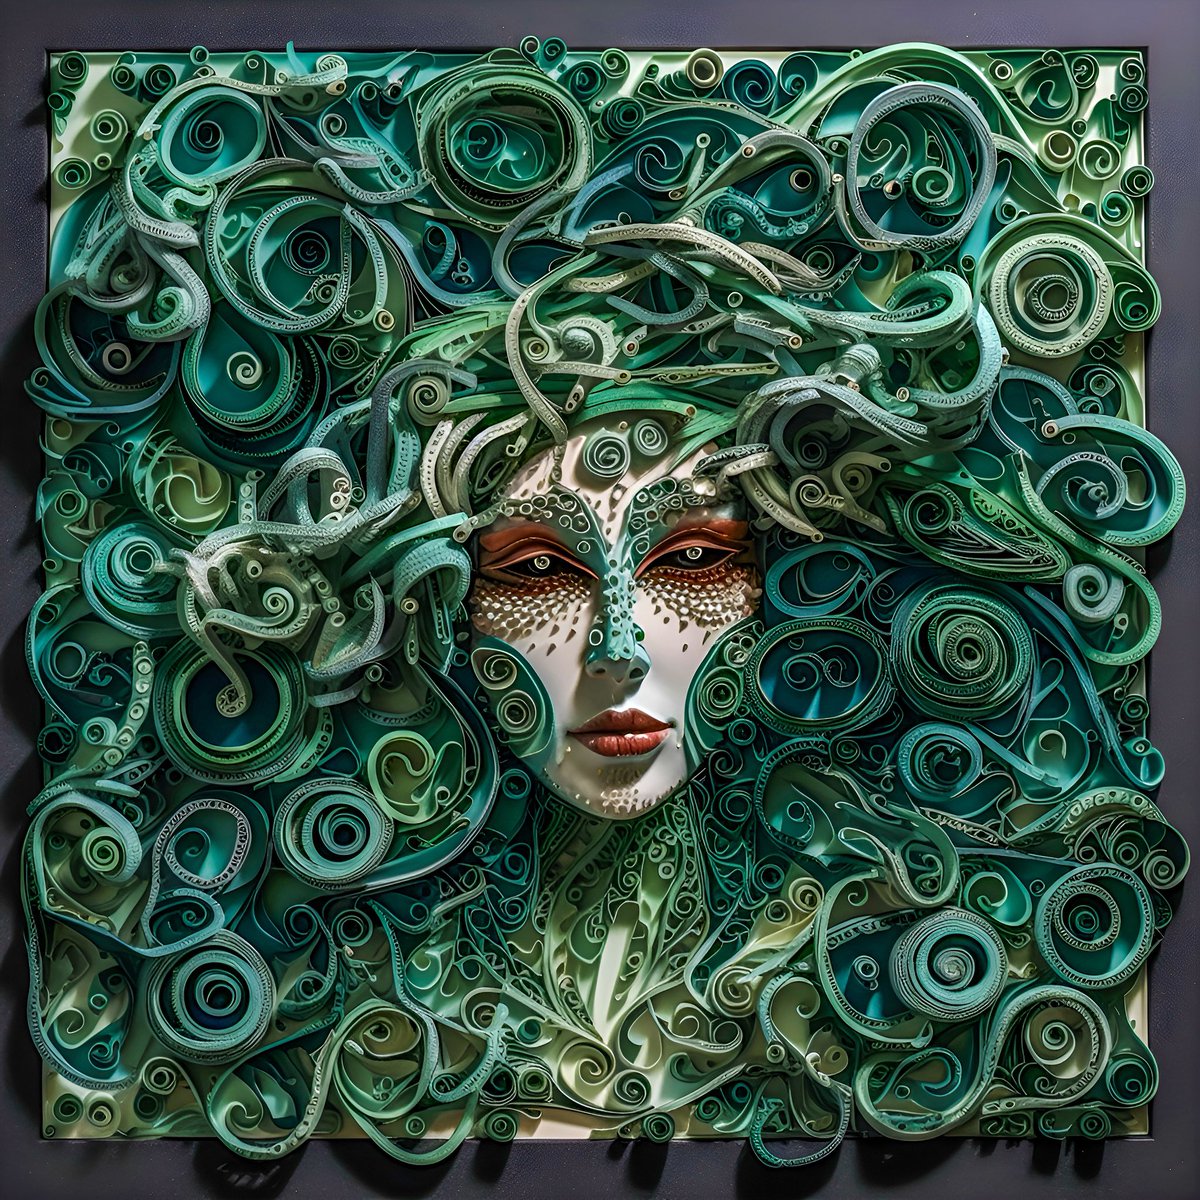 A Late GM to ya NFT Community Today's Quilling Lottery # is 171 owned by @slyfoxsing which came with a bonus animated piece. Medusa Gift sent and I thank you for all your support.